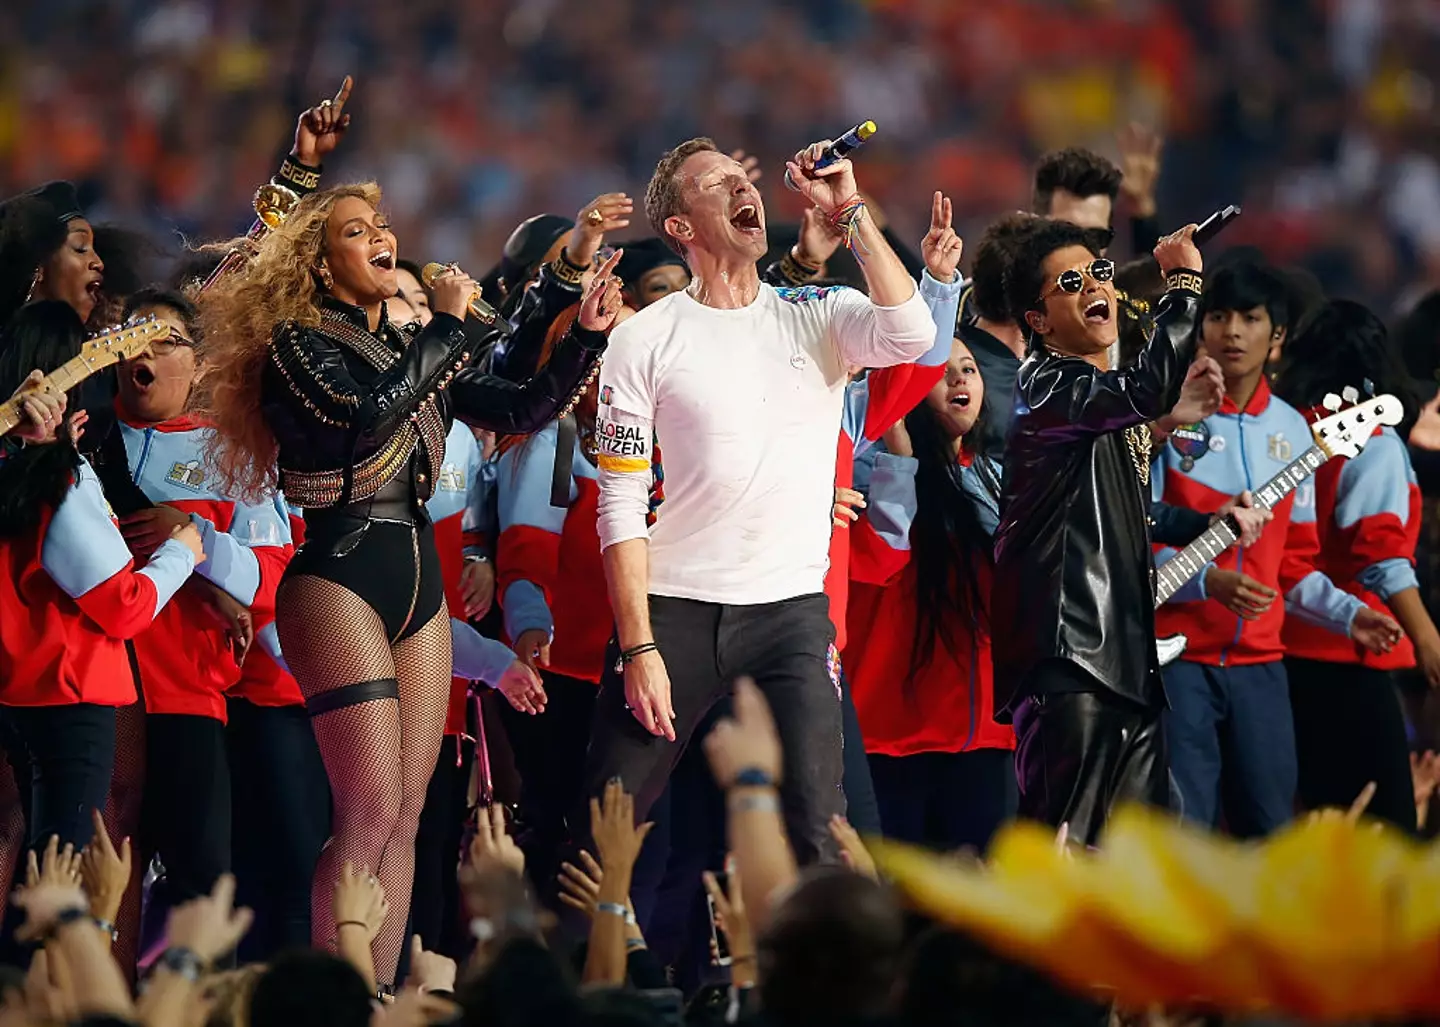 Beyonce, Chris Martin of Coldplay and Bruno Mars perform during Super Bowl.